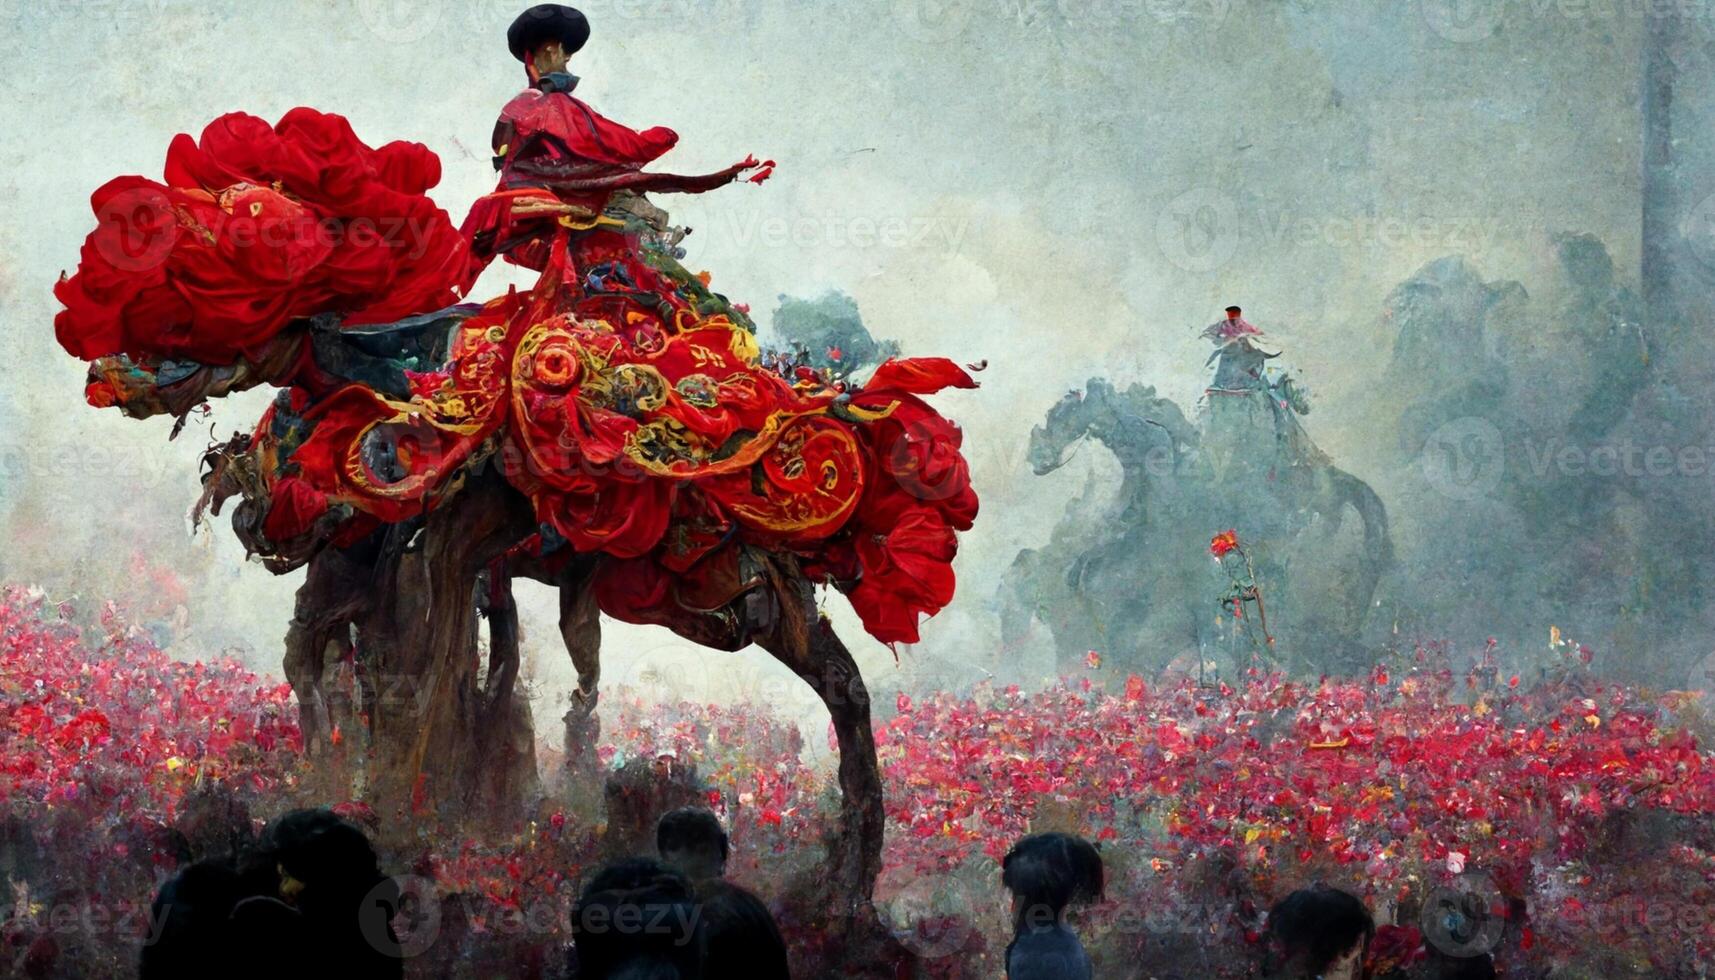 painting of a woman riding on the back of a horse. . photo